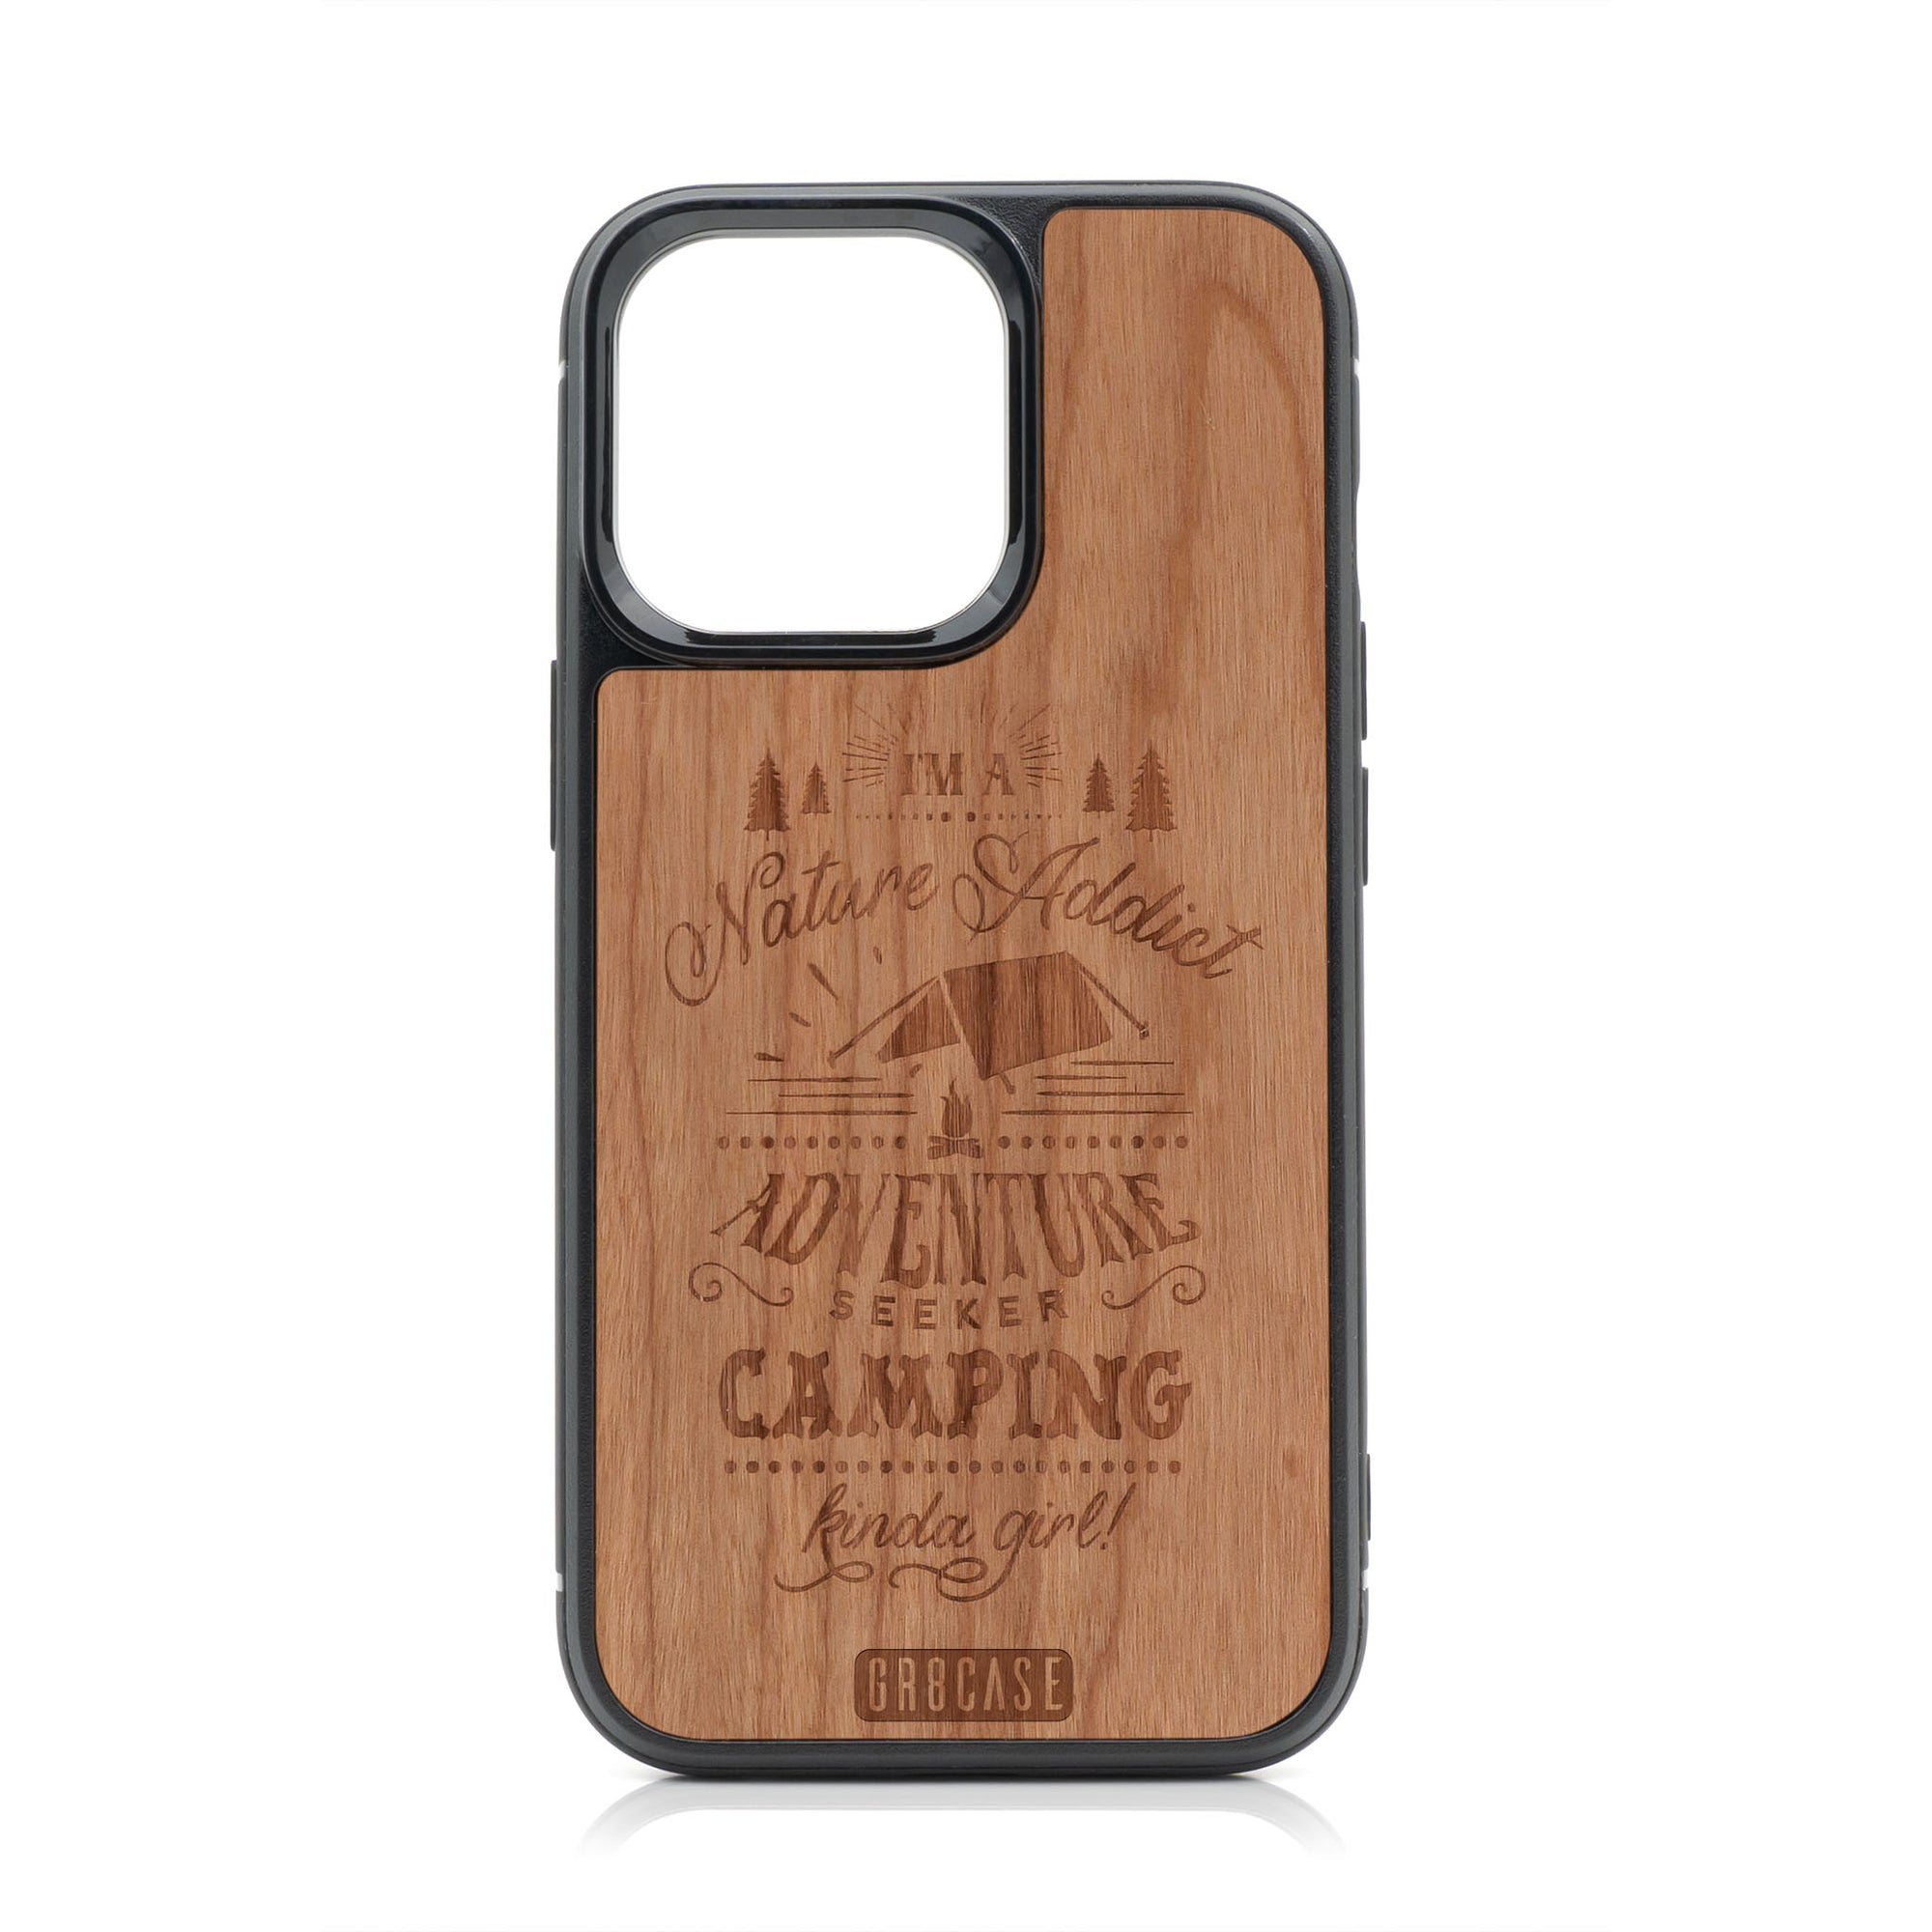 I'm A Nature Addict Adventure Seeker Camping Kinda Girl Design Wood Case For iPhone 13 Pro